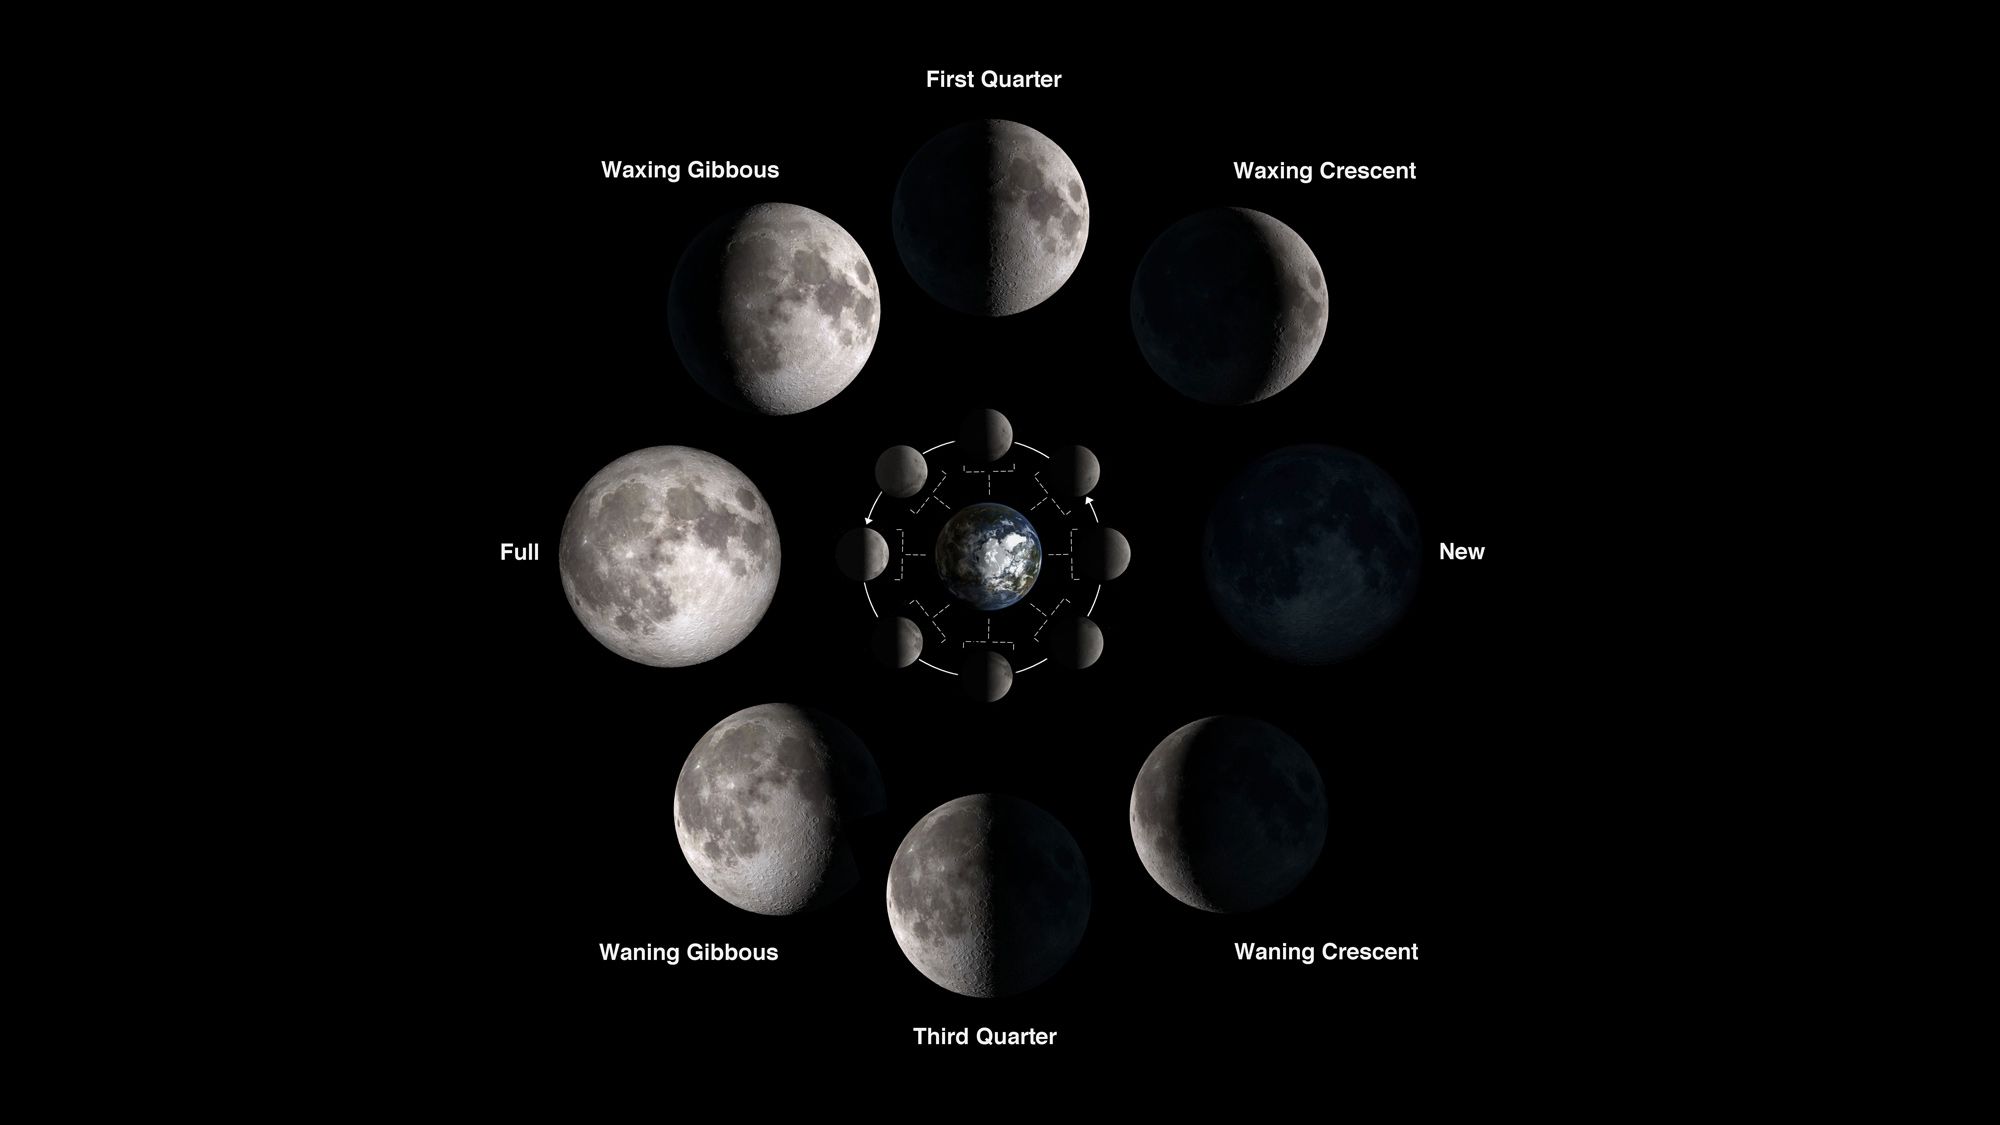 The NASA graphic shows the phases of the moon